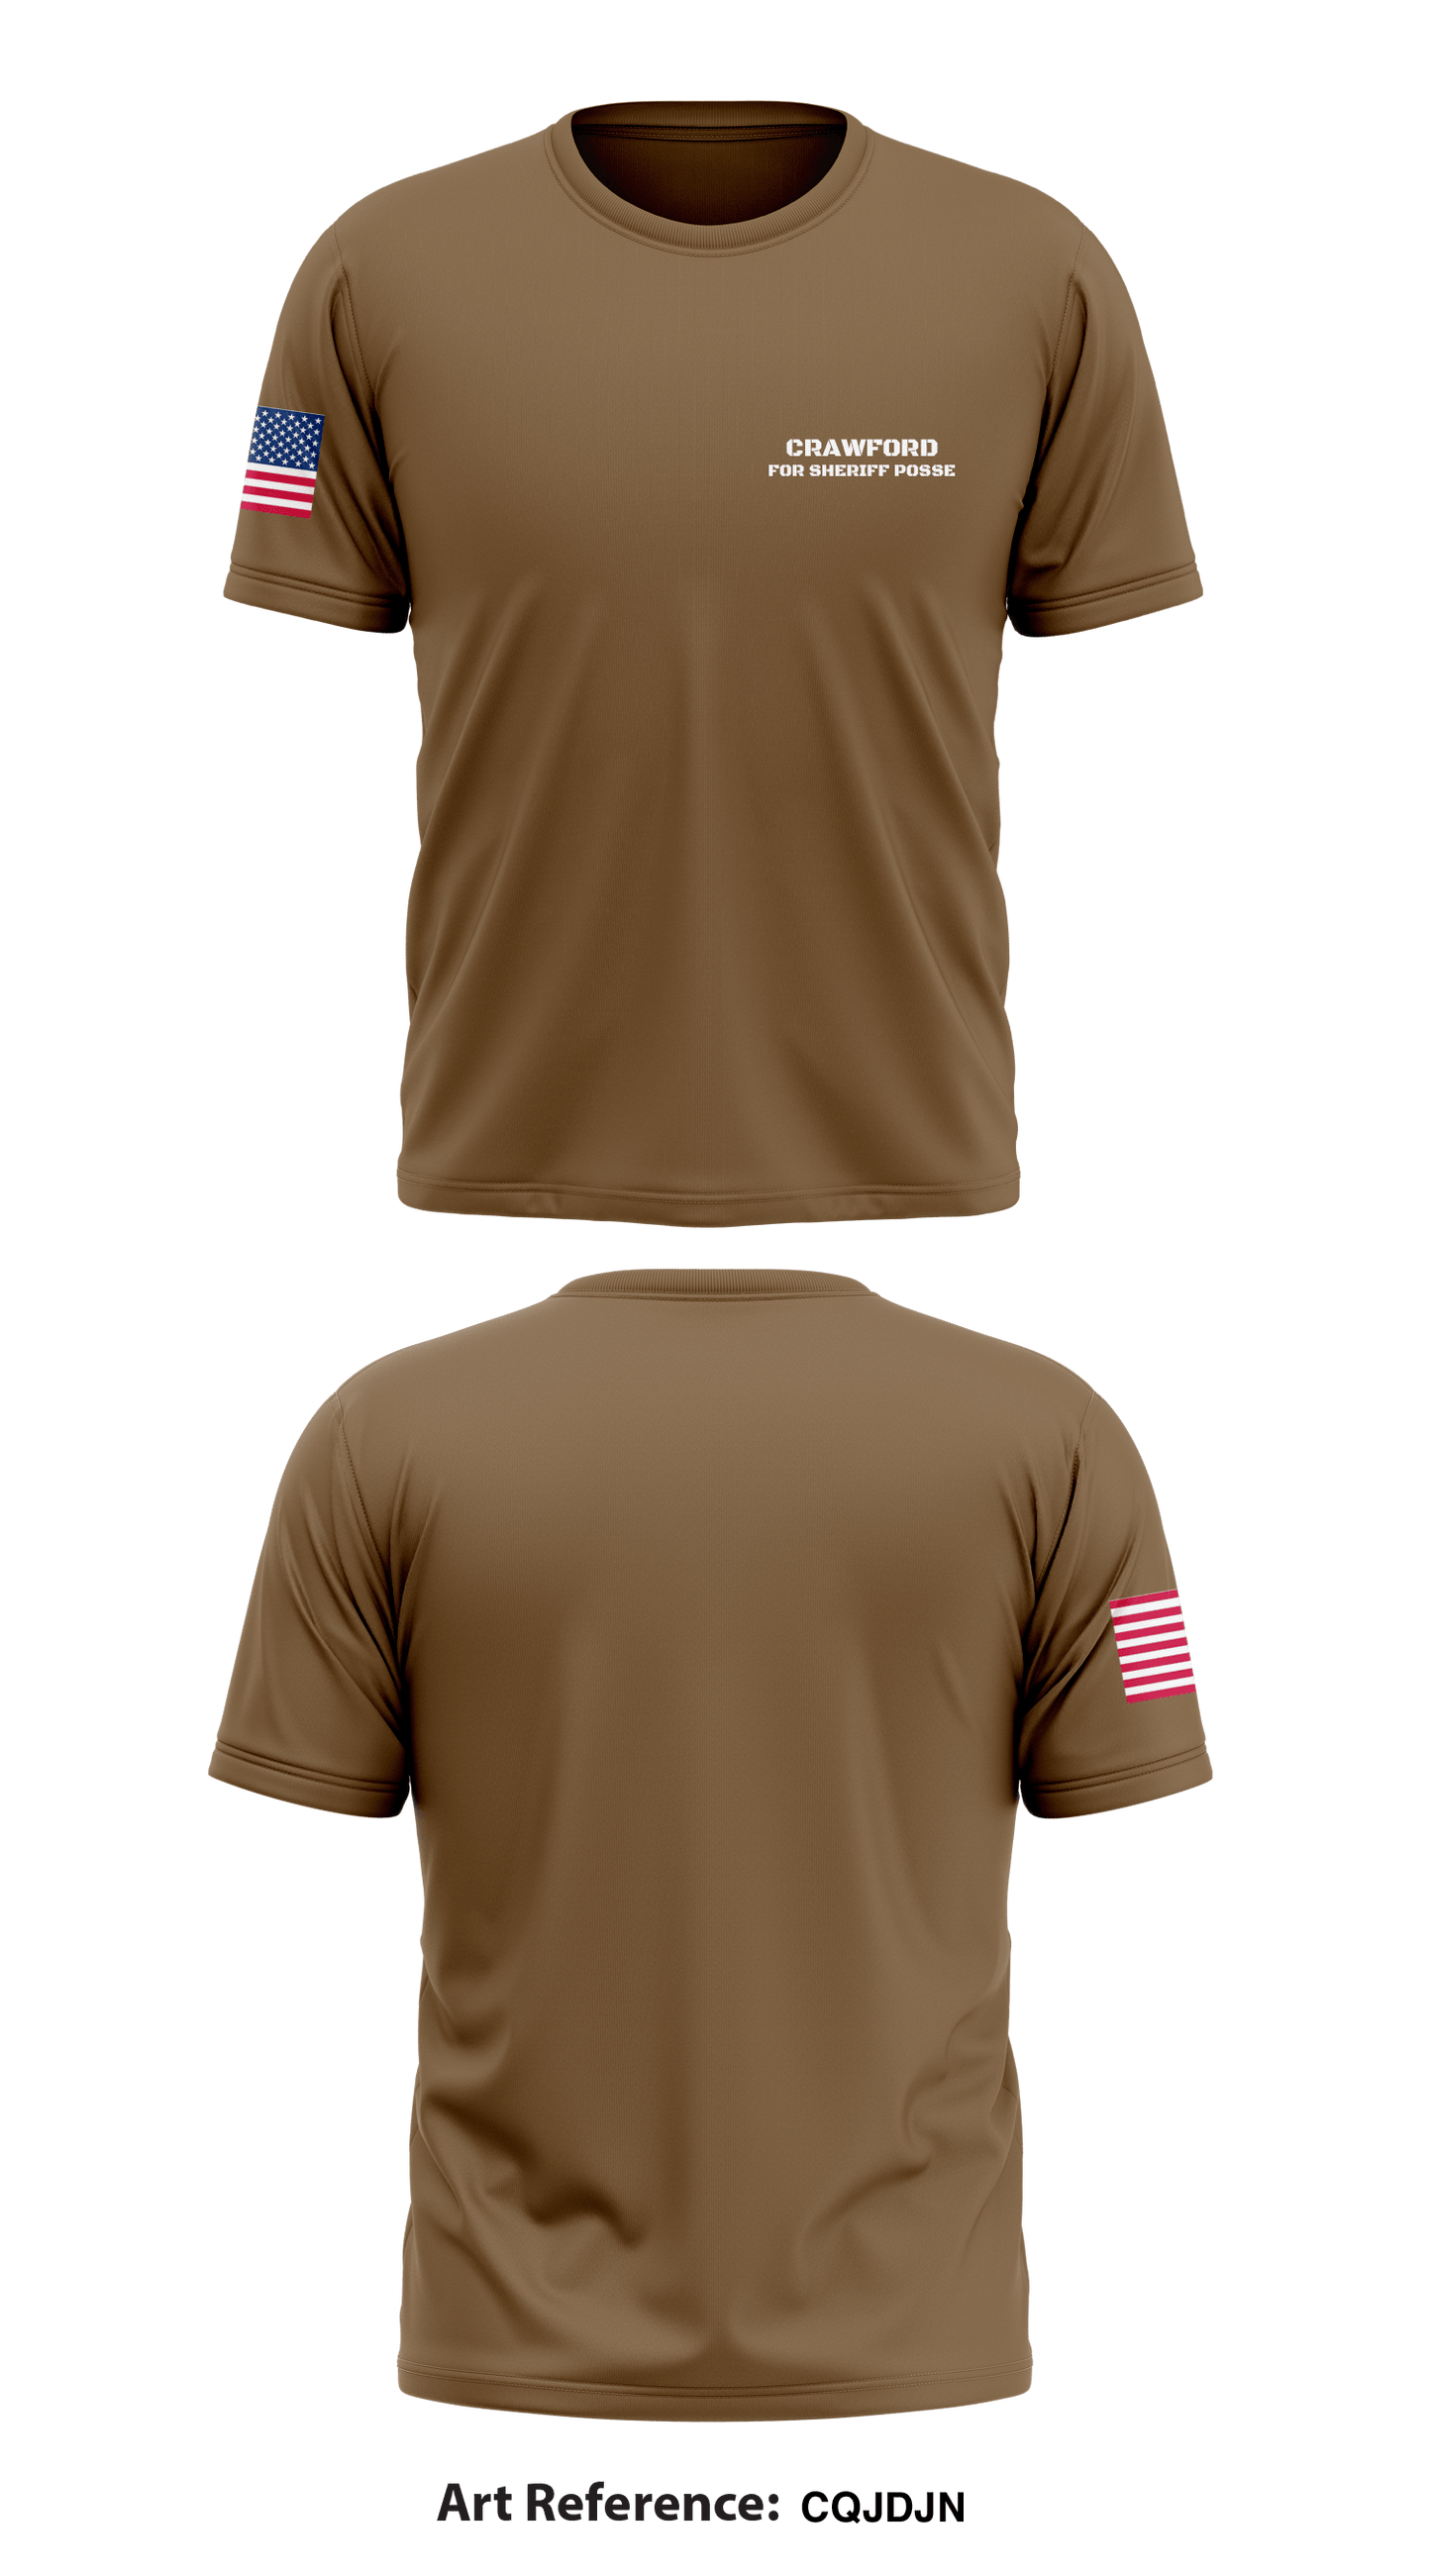 Crawford for Sheriff Posse Store 1 Core Men's SS Performance Tee - cqJDJN